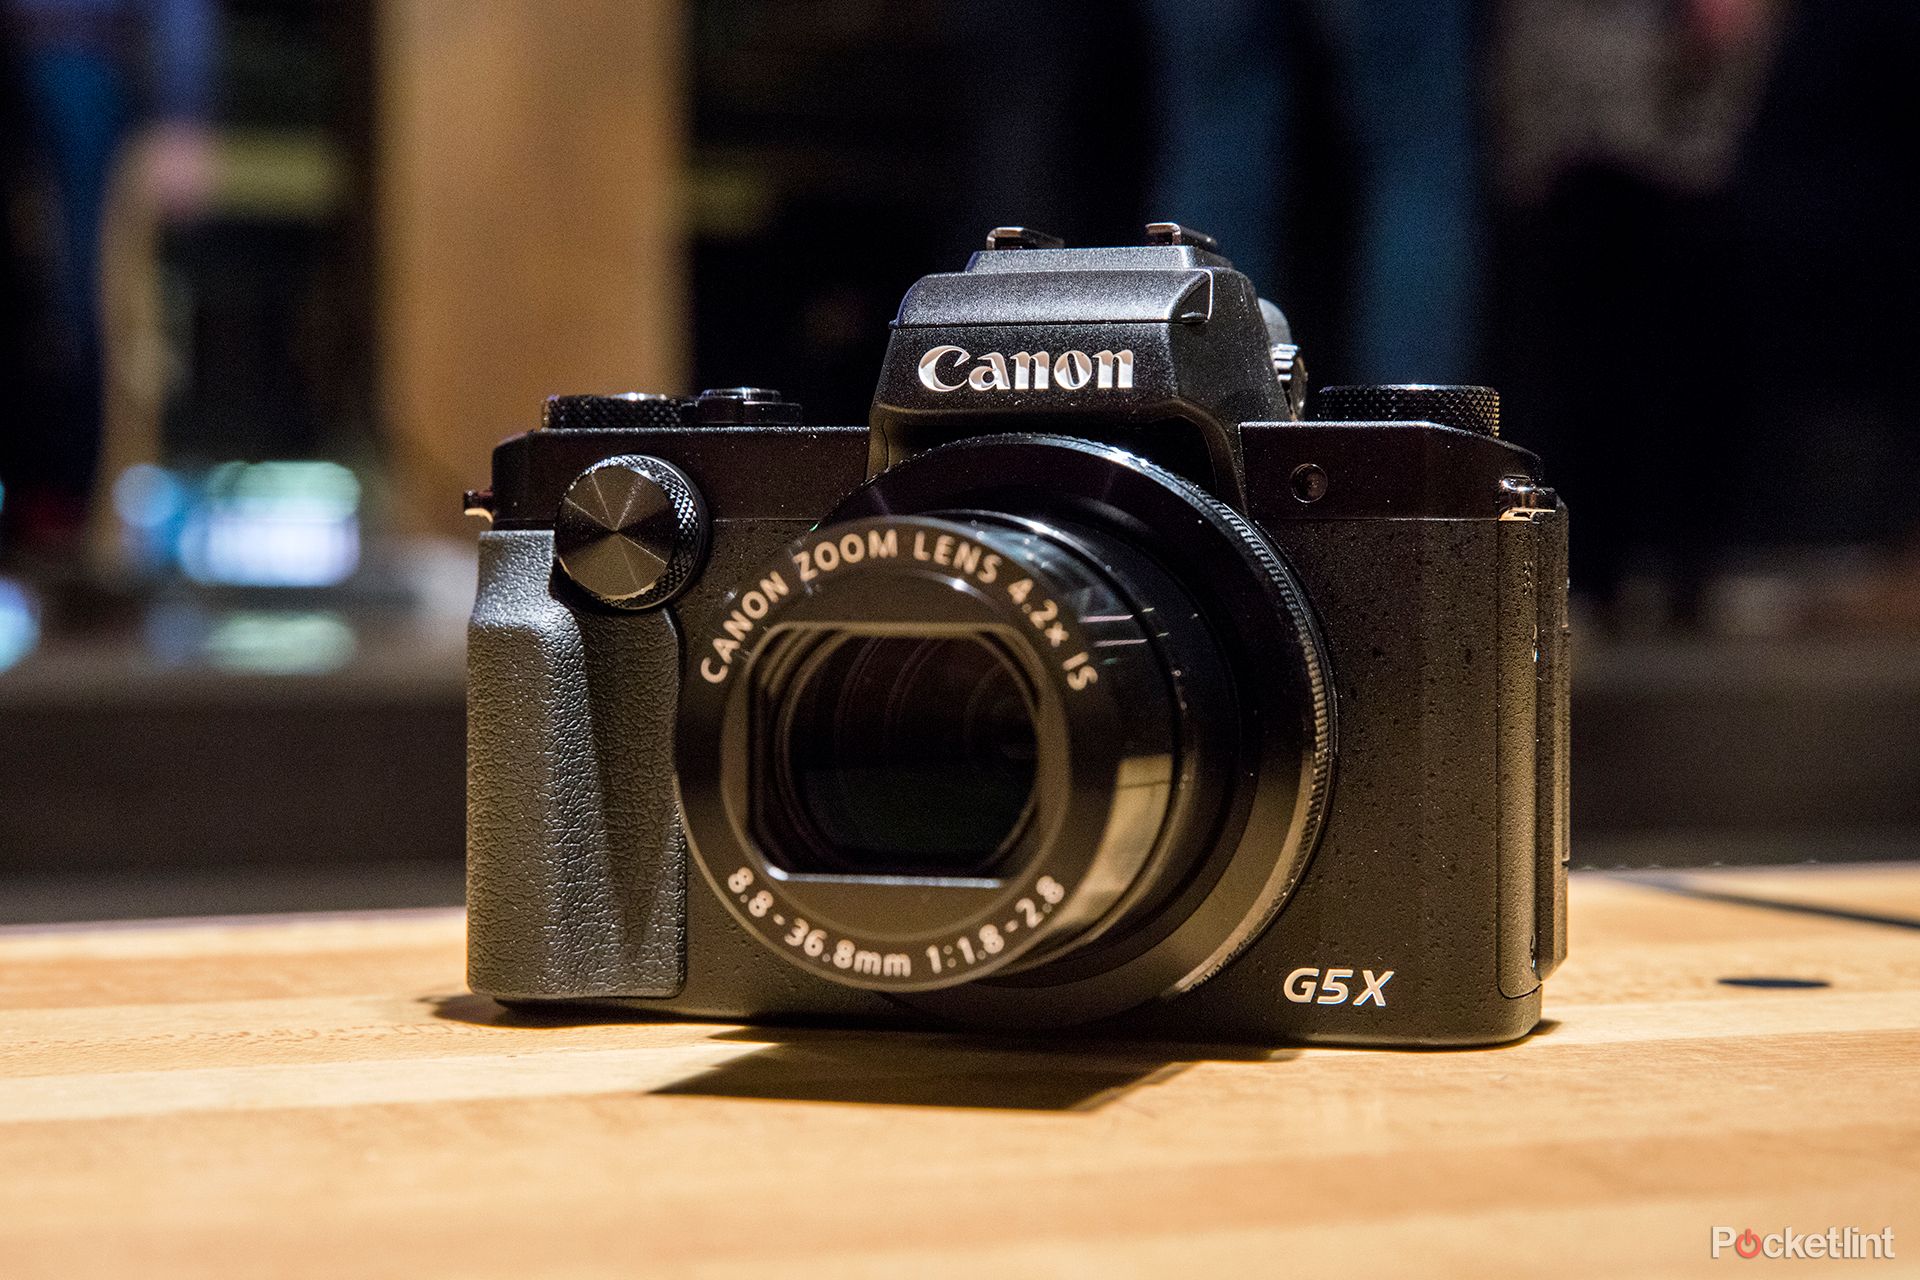 canon powershot g5 x review image 1